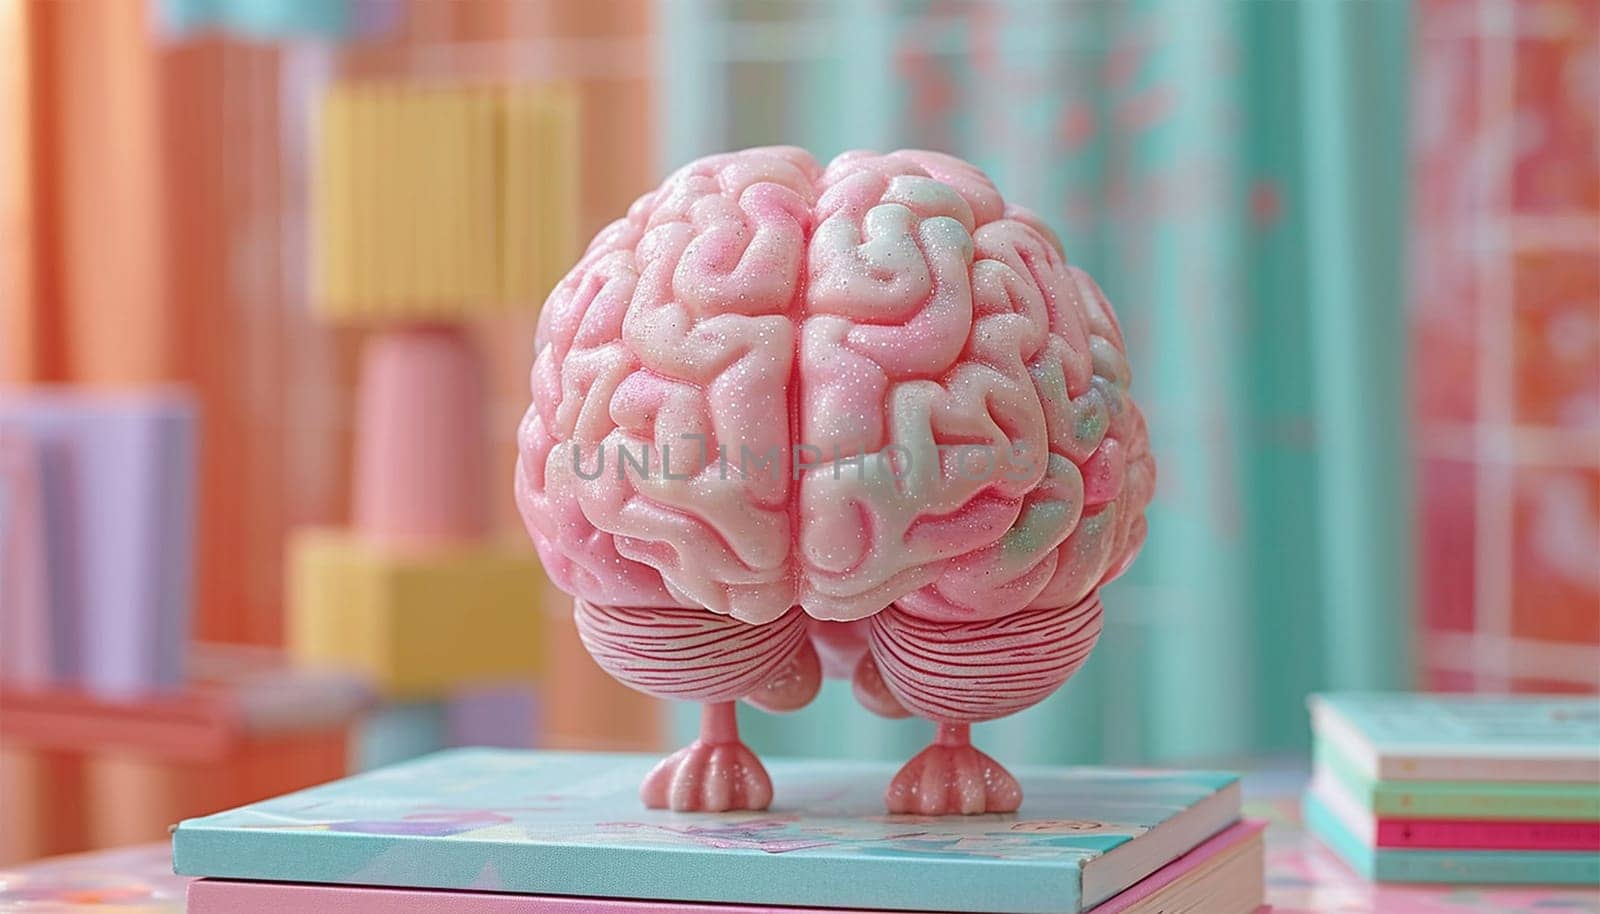 Cute animation smart cartoon brain standing on pile of books. Reading a book. pastel colors 3D. Education,brainstorming and learning concept by Annebel146